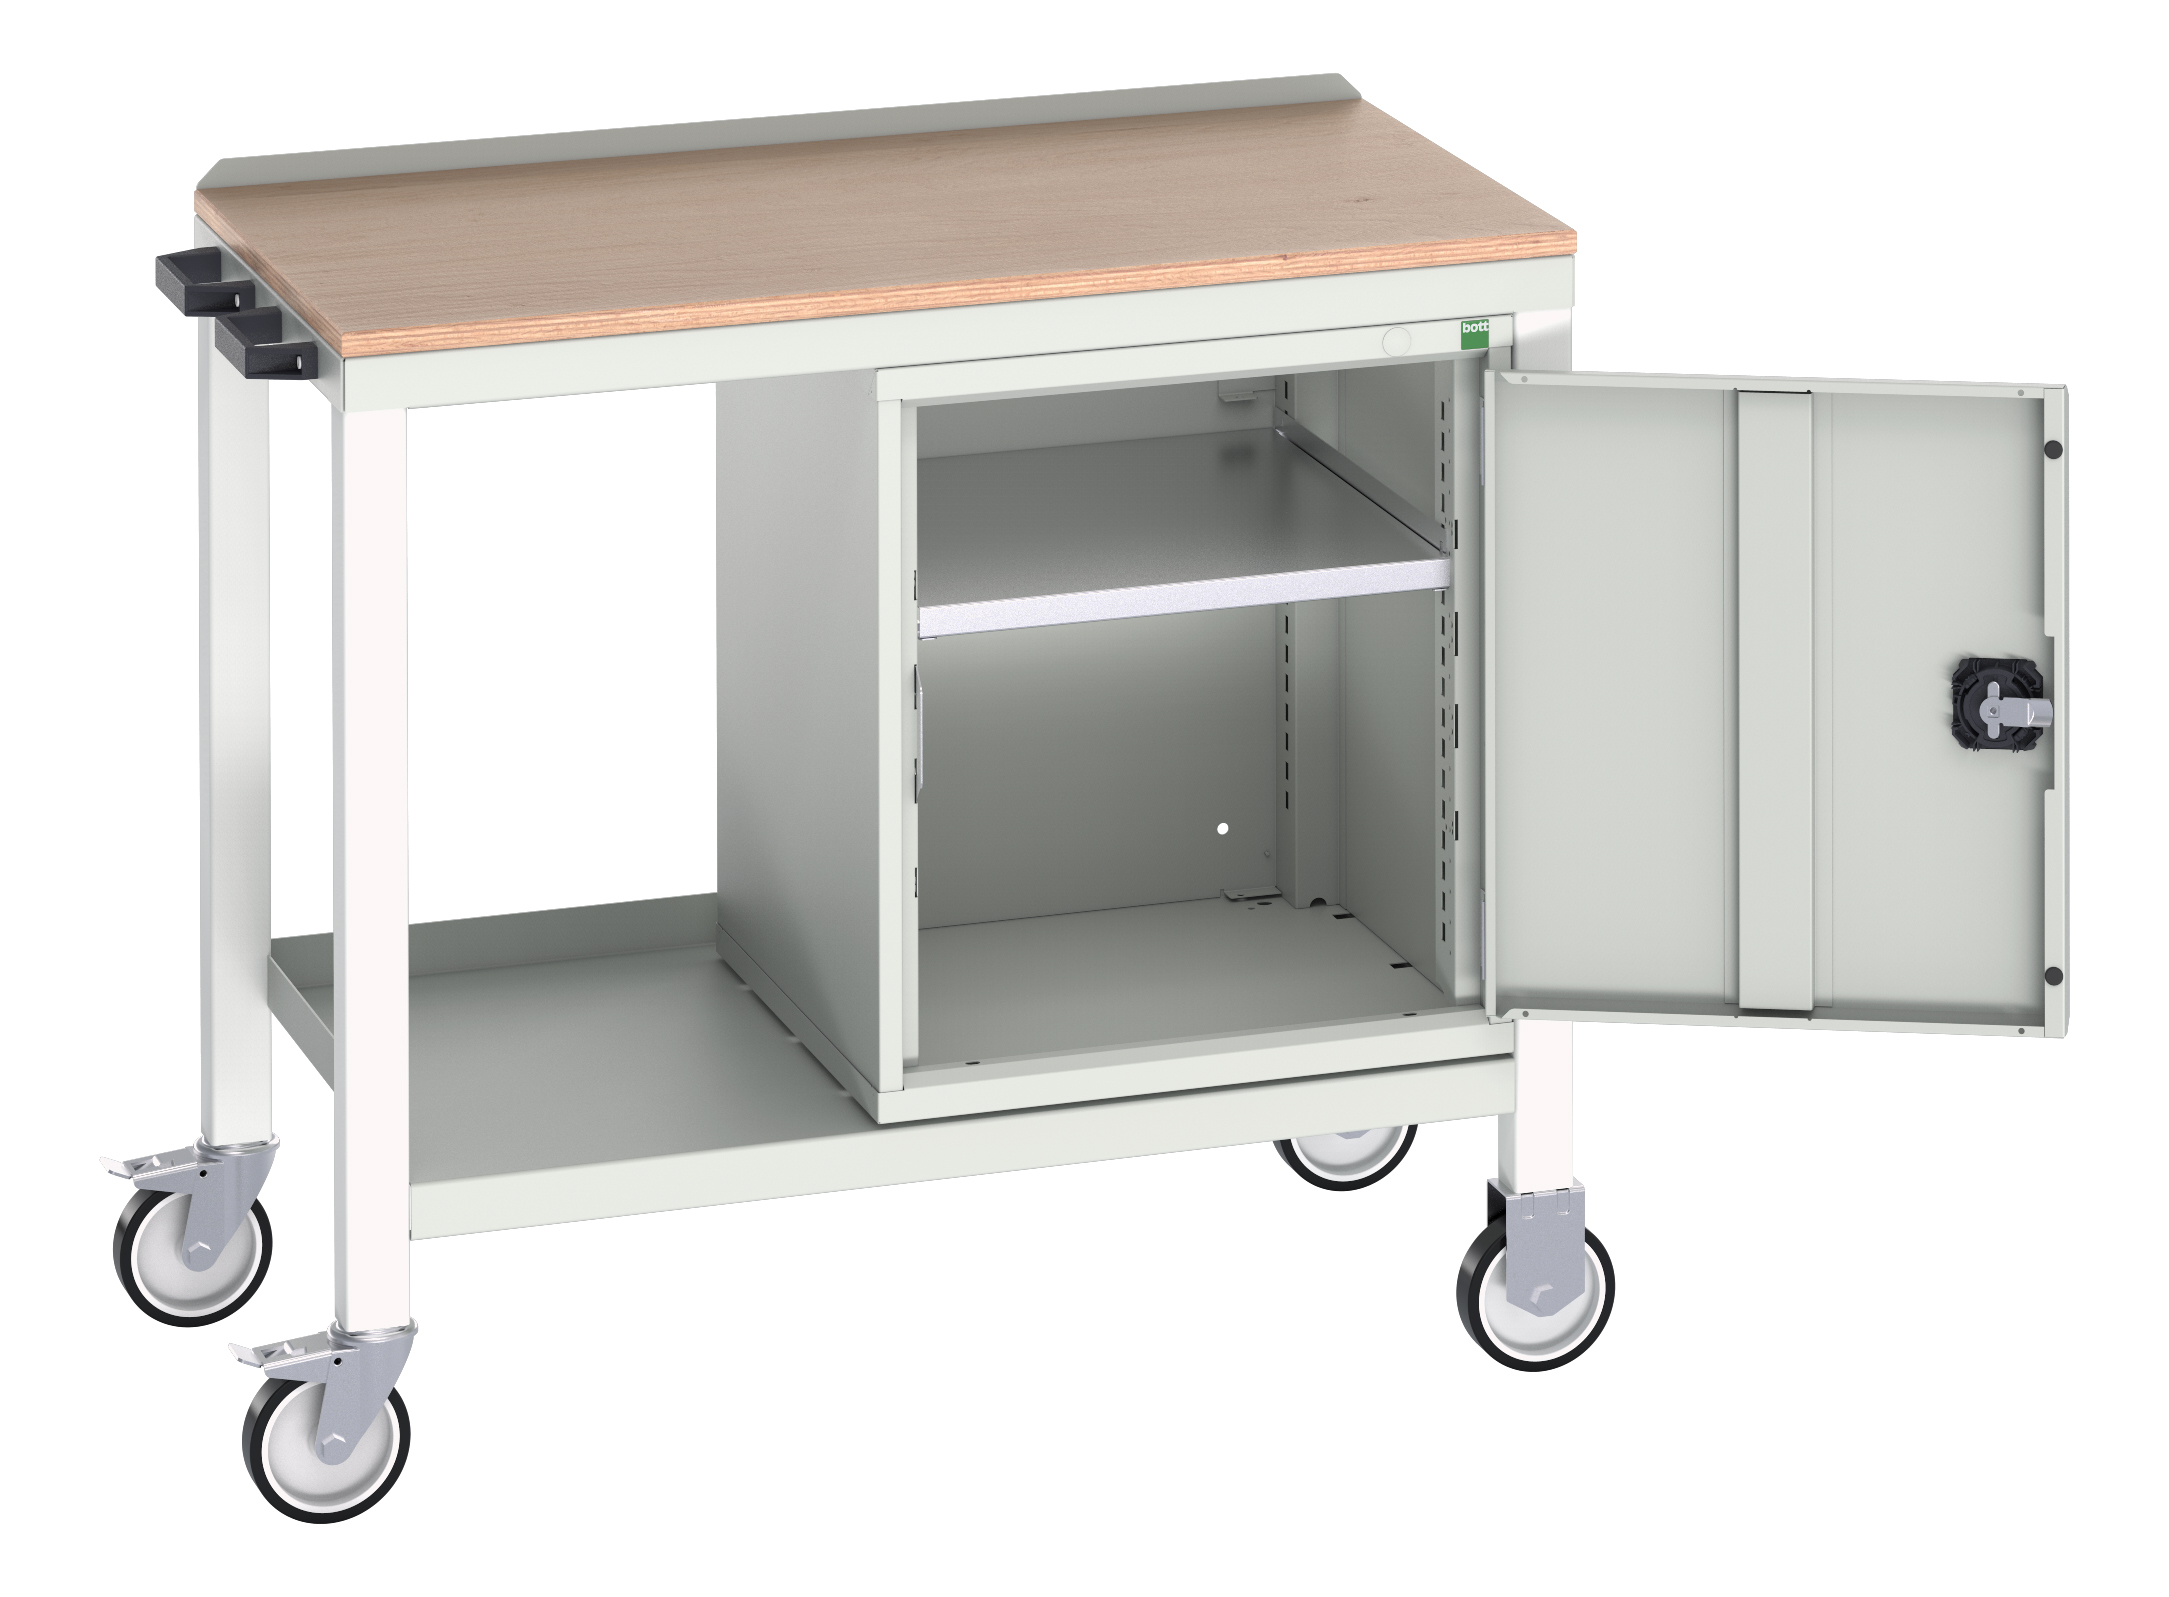 Bott Verso Mobile Welded Bench With Full Cupboard - 16922803.16